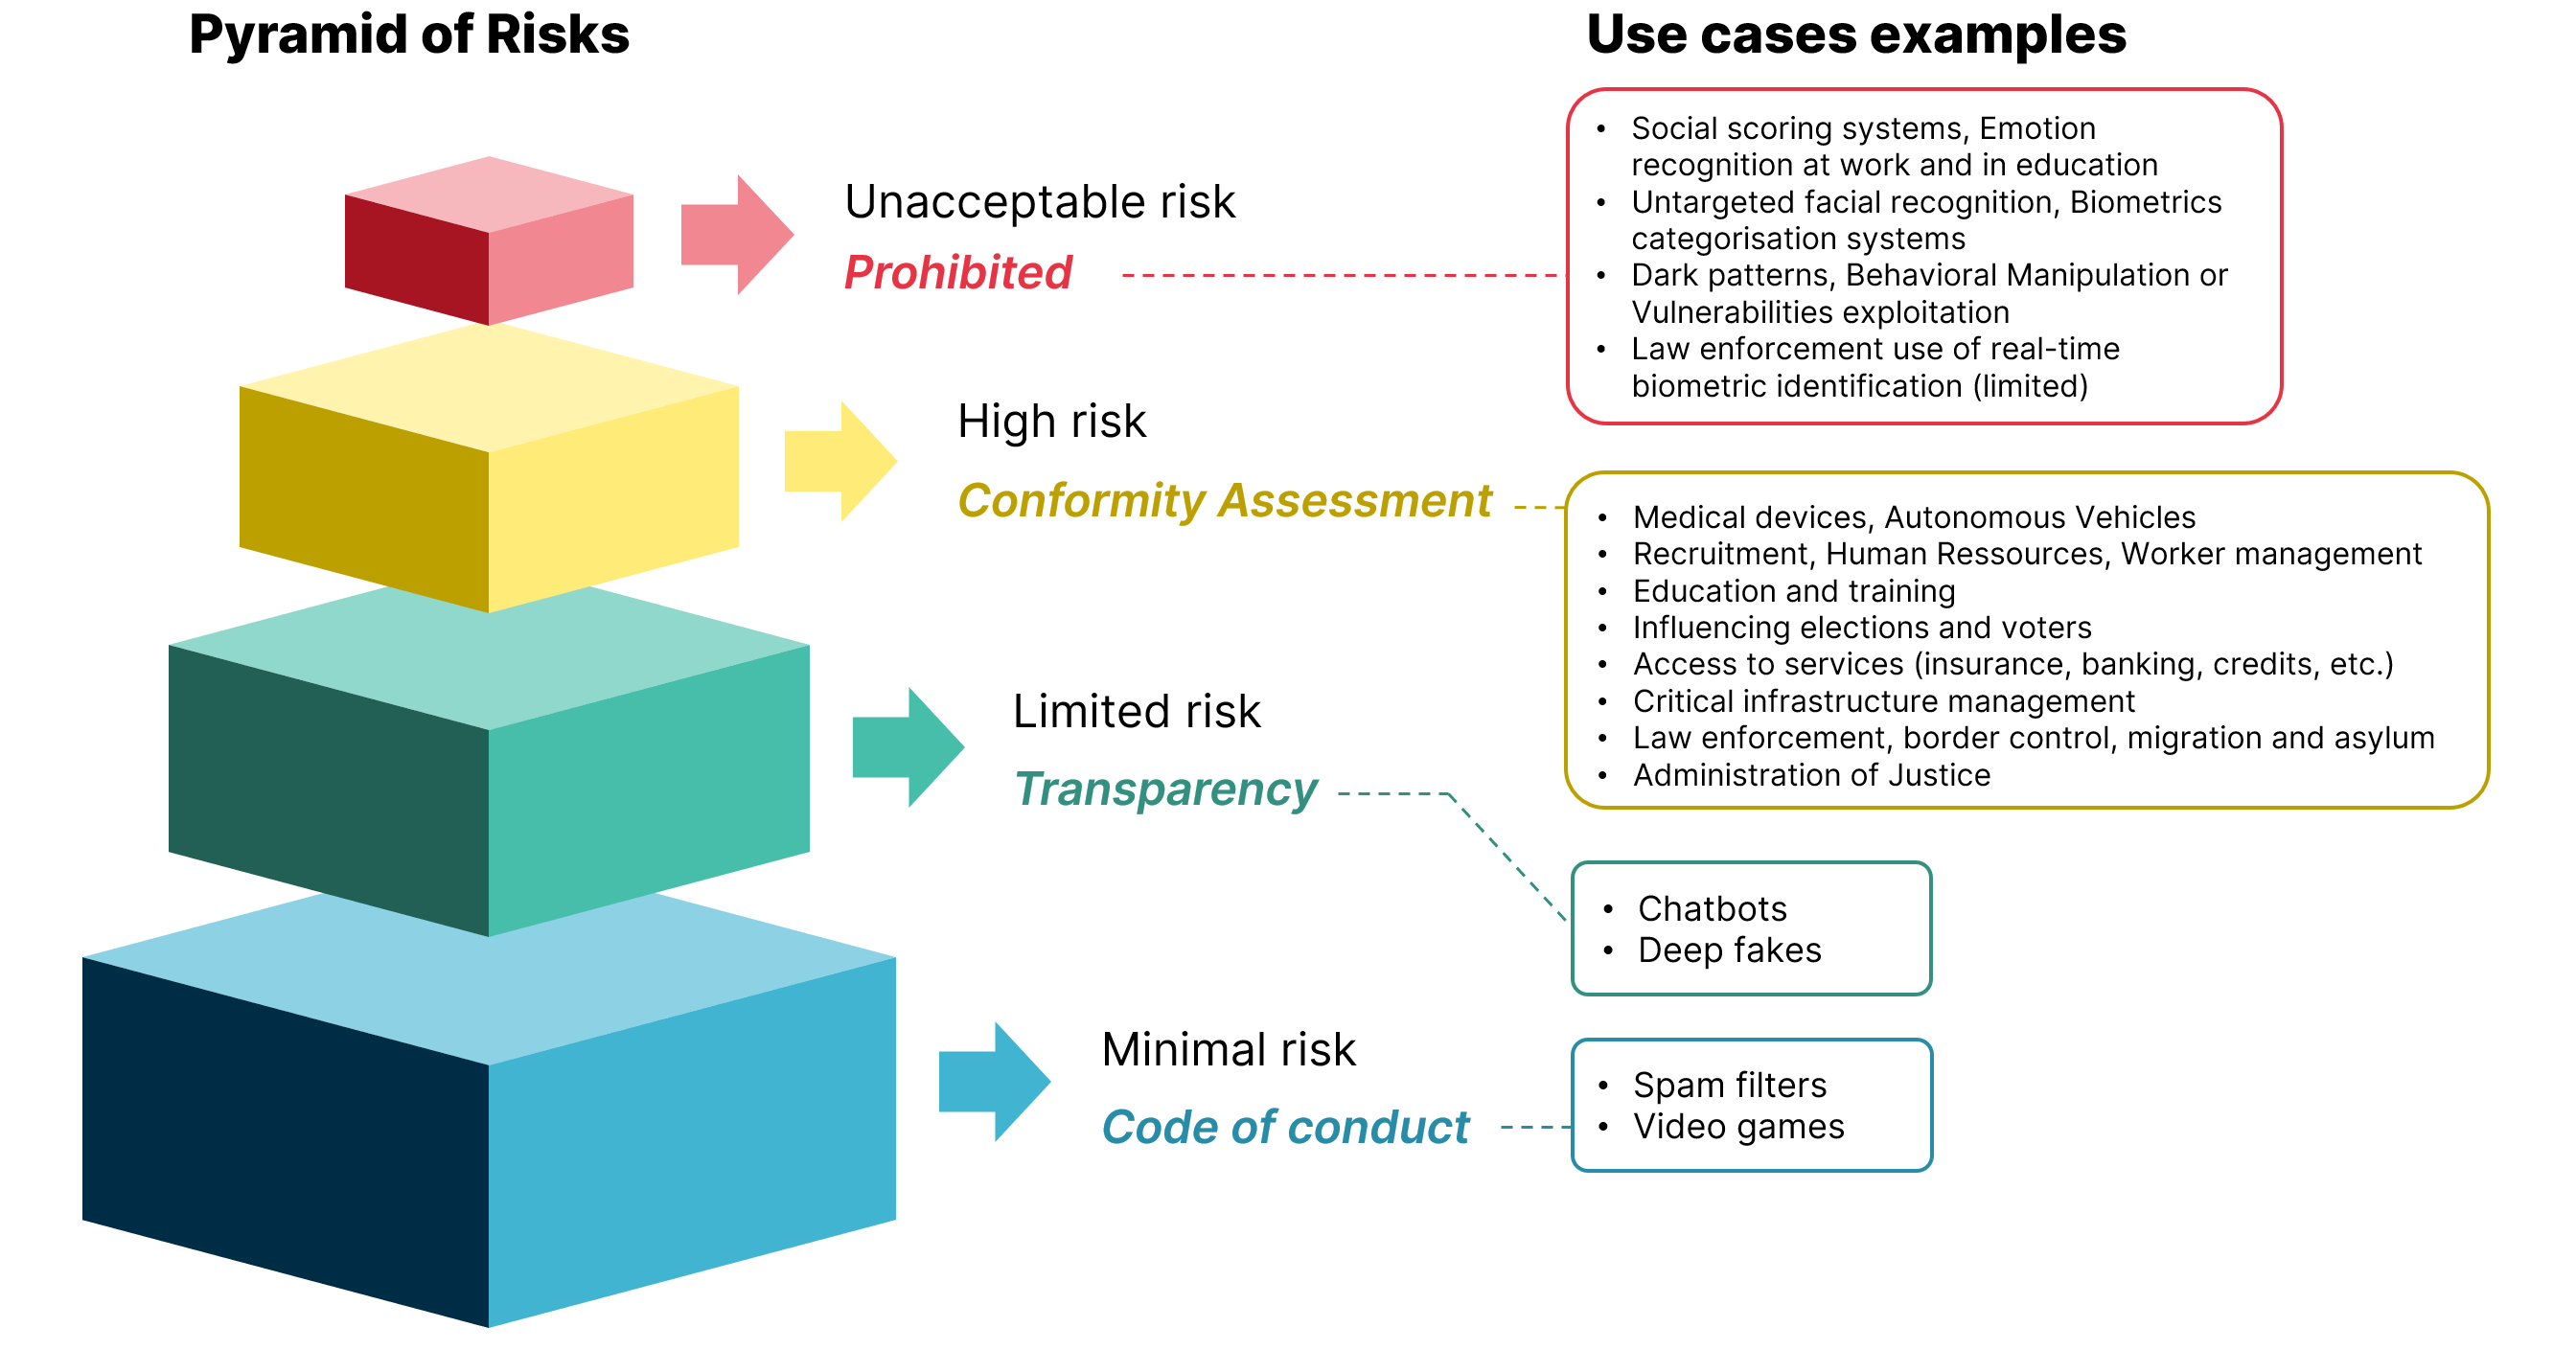 Figure 2 - AI Risk categories according to the European AI Act